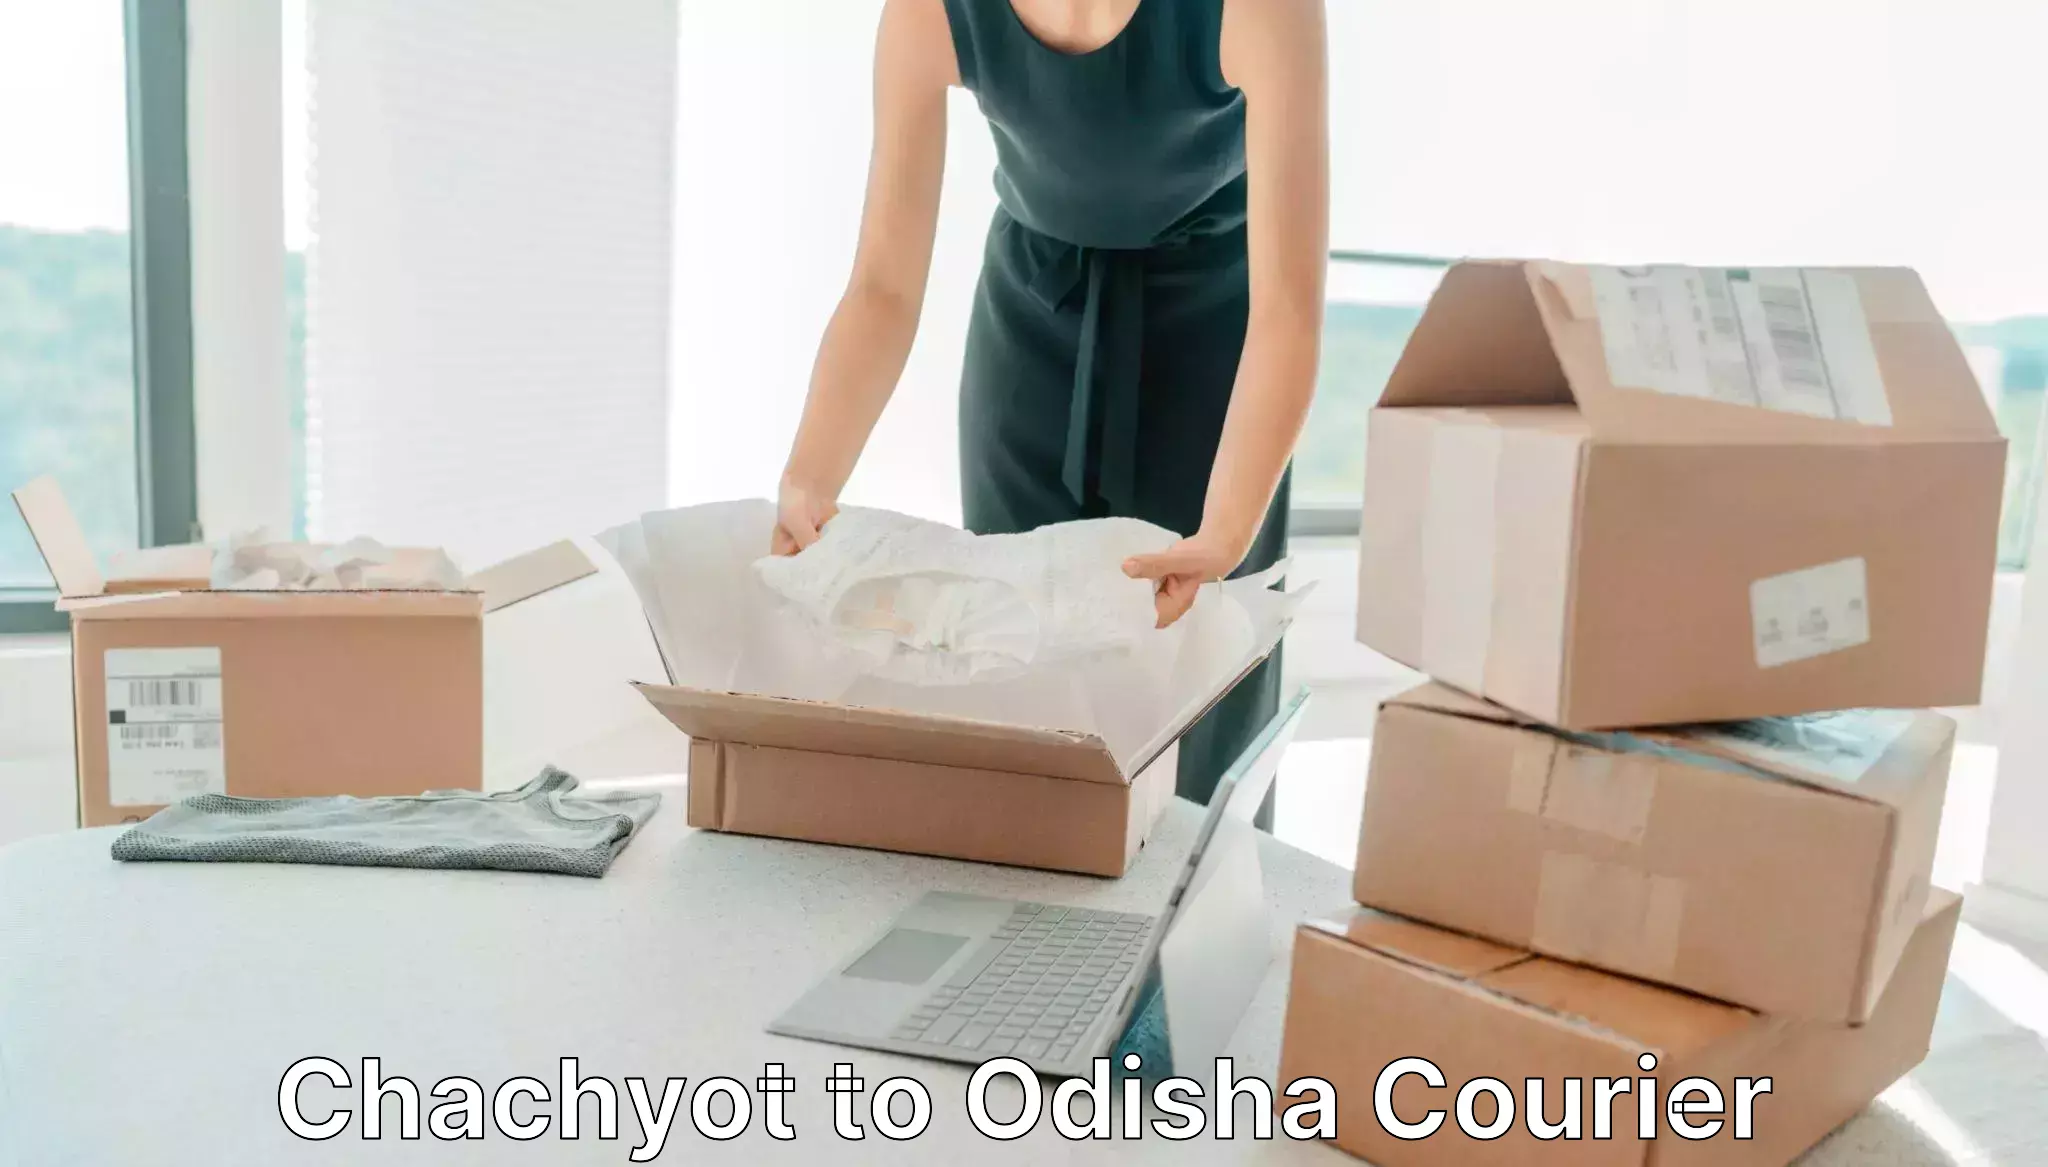 User-friendly courier app Chachyot to Cuttack